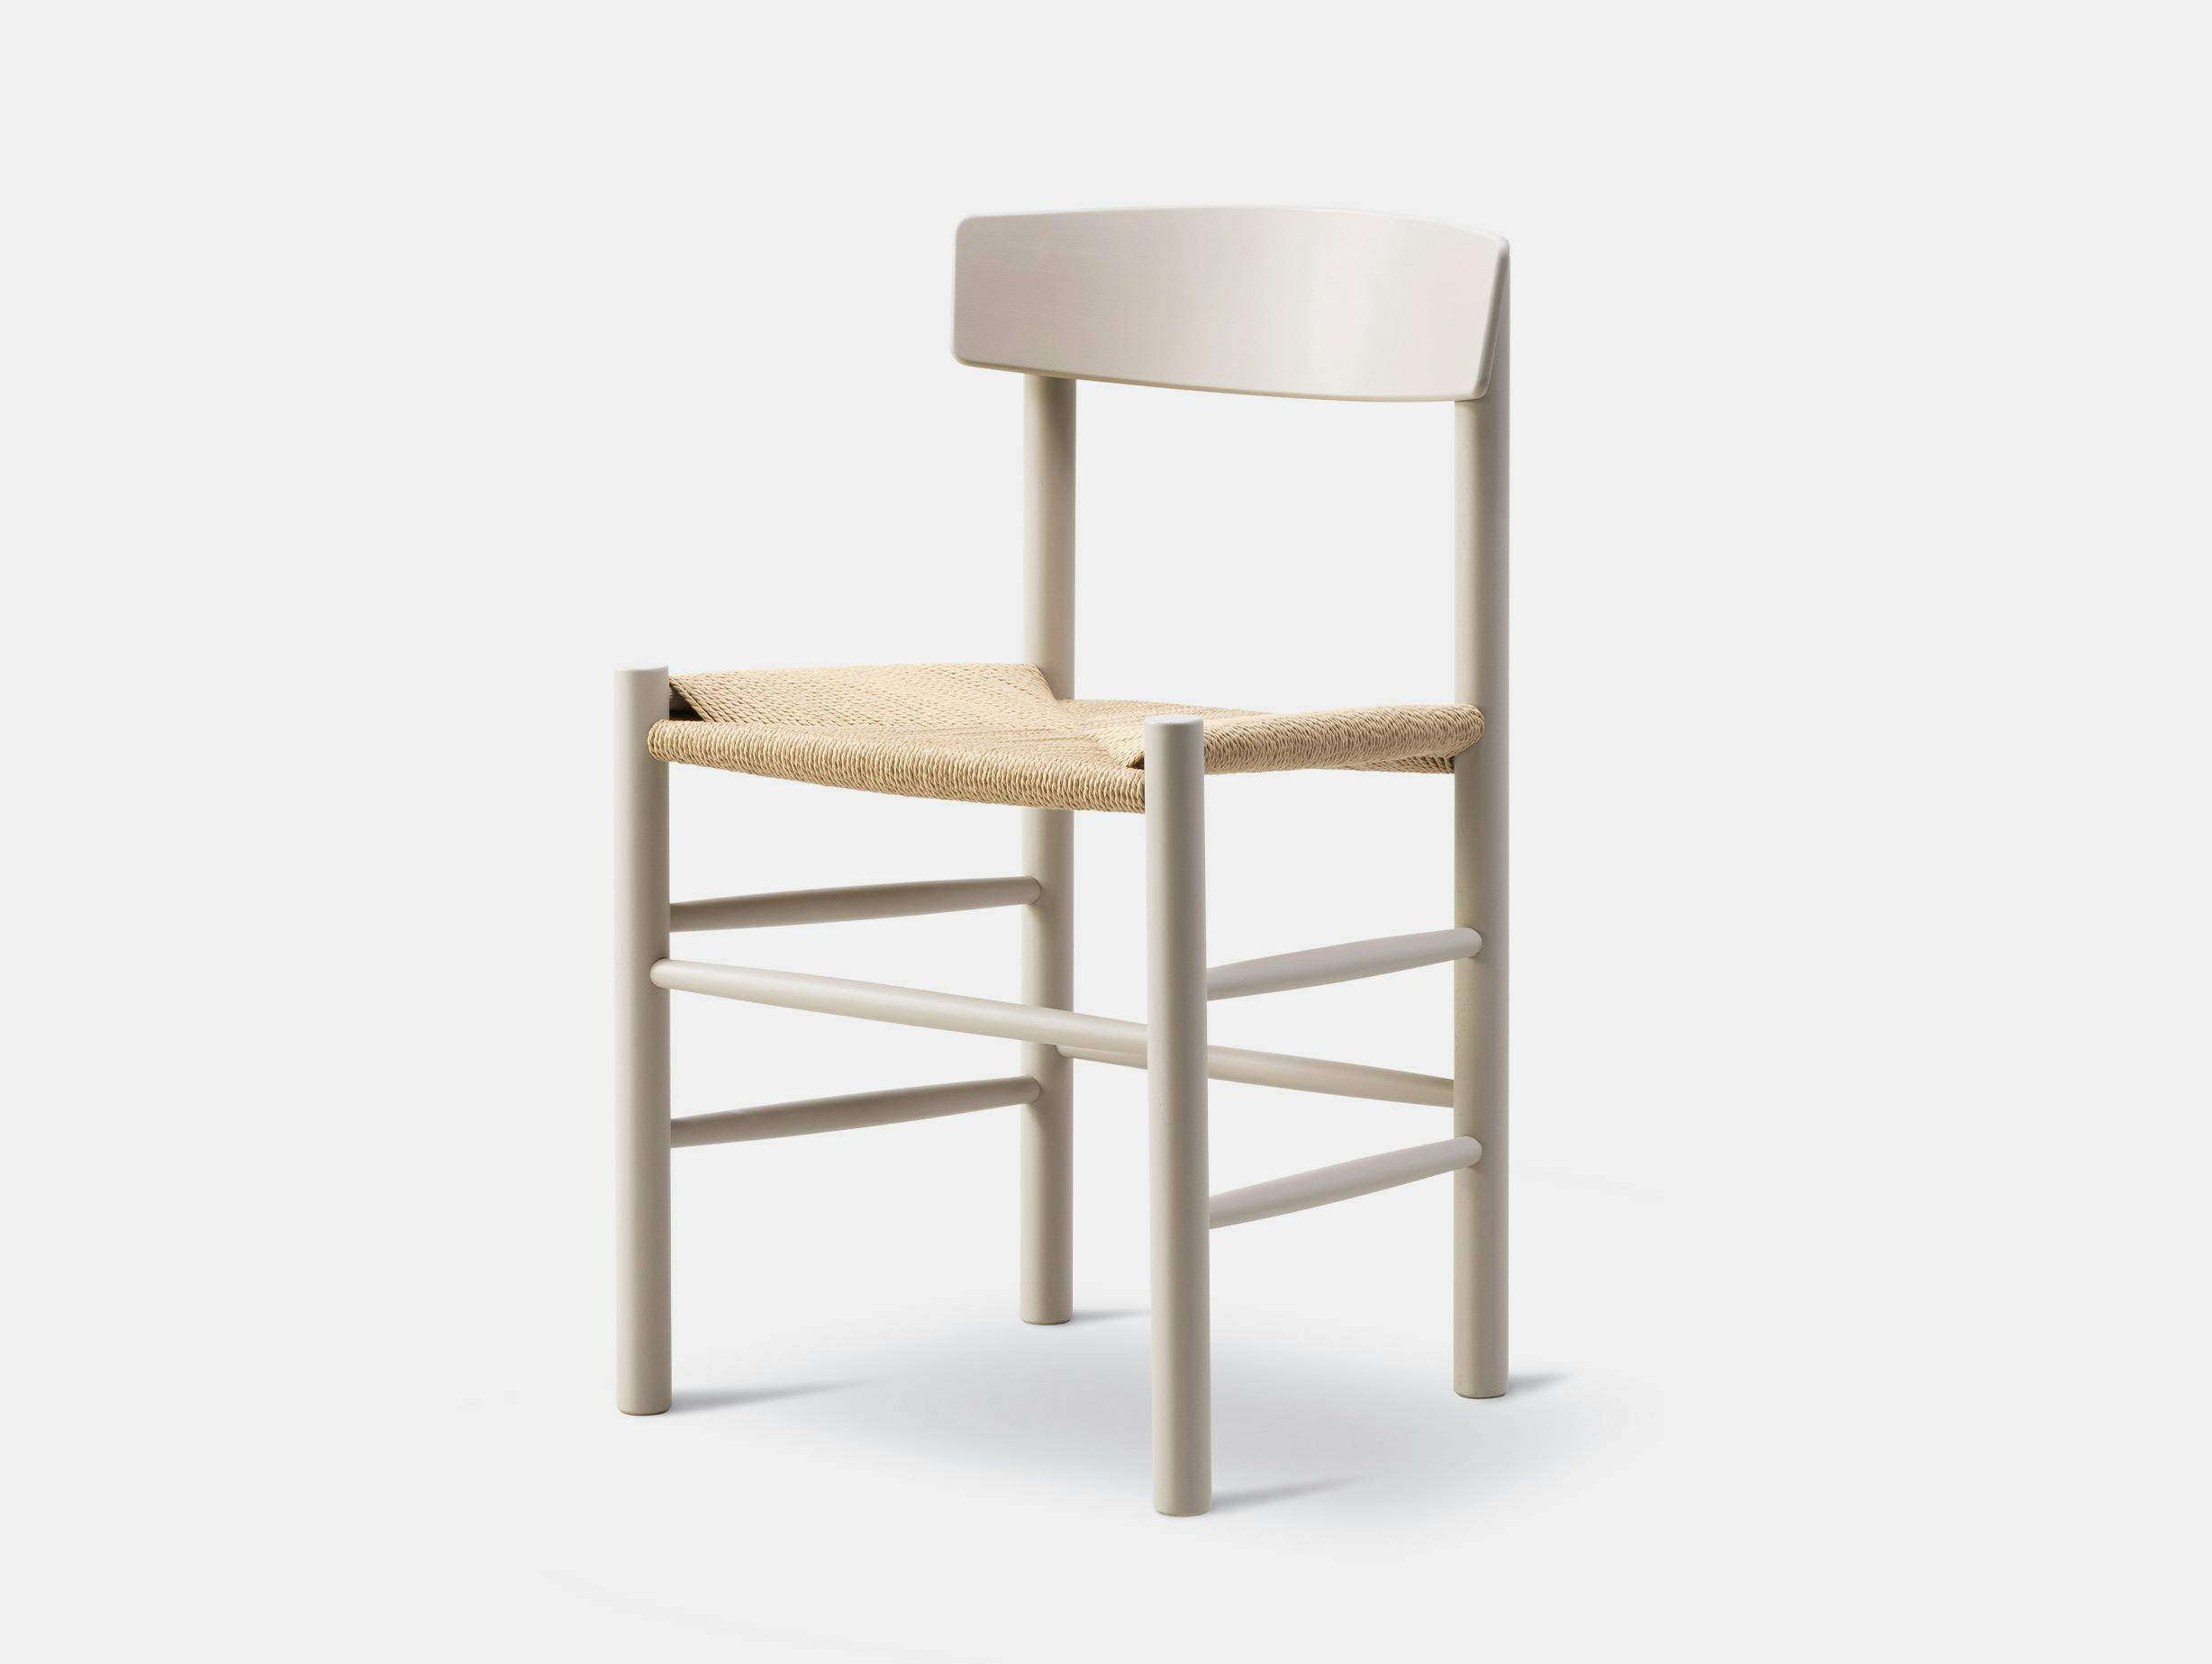 Fredericia borge mogensen j39 the peoples chair lacquered beech pebble grey